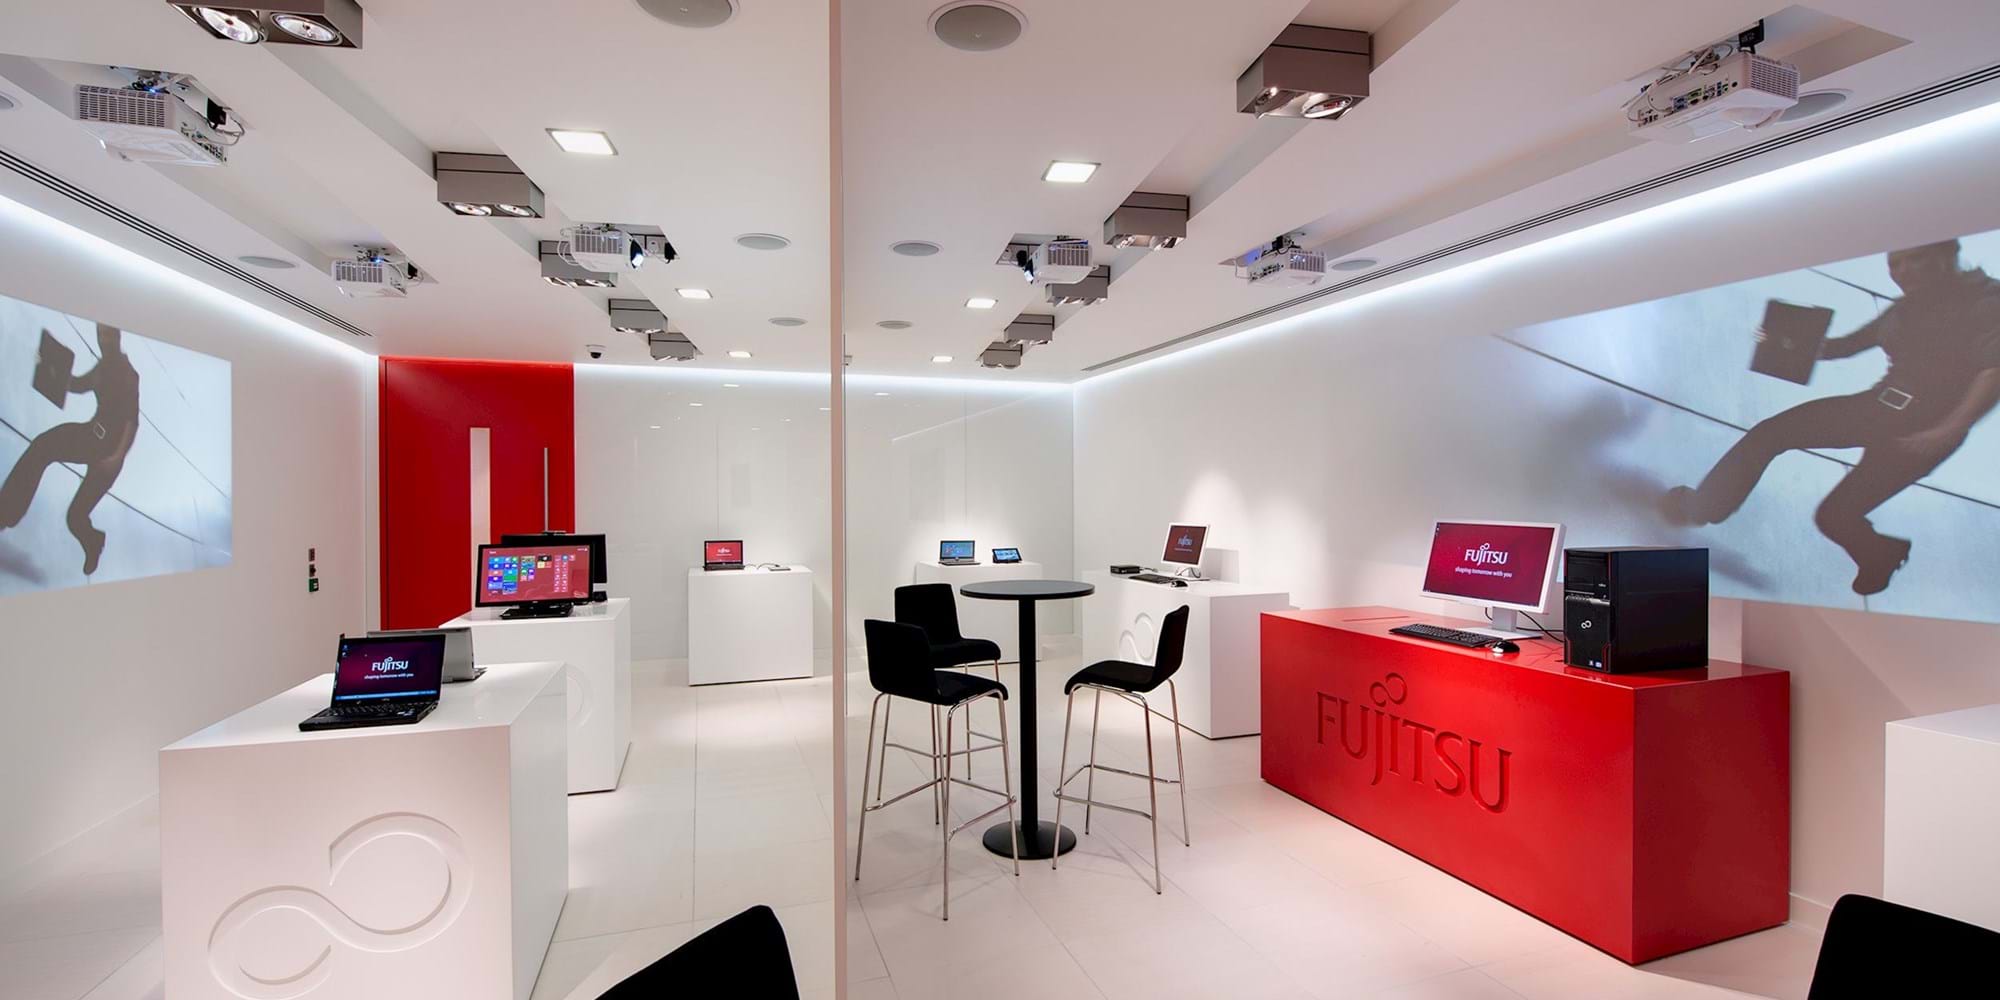 Modus Workspace office design, fit out and refurbishment - LON 22 Innovation Centre - Fujitsu 05 highres sRGB.jpg